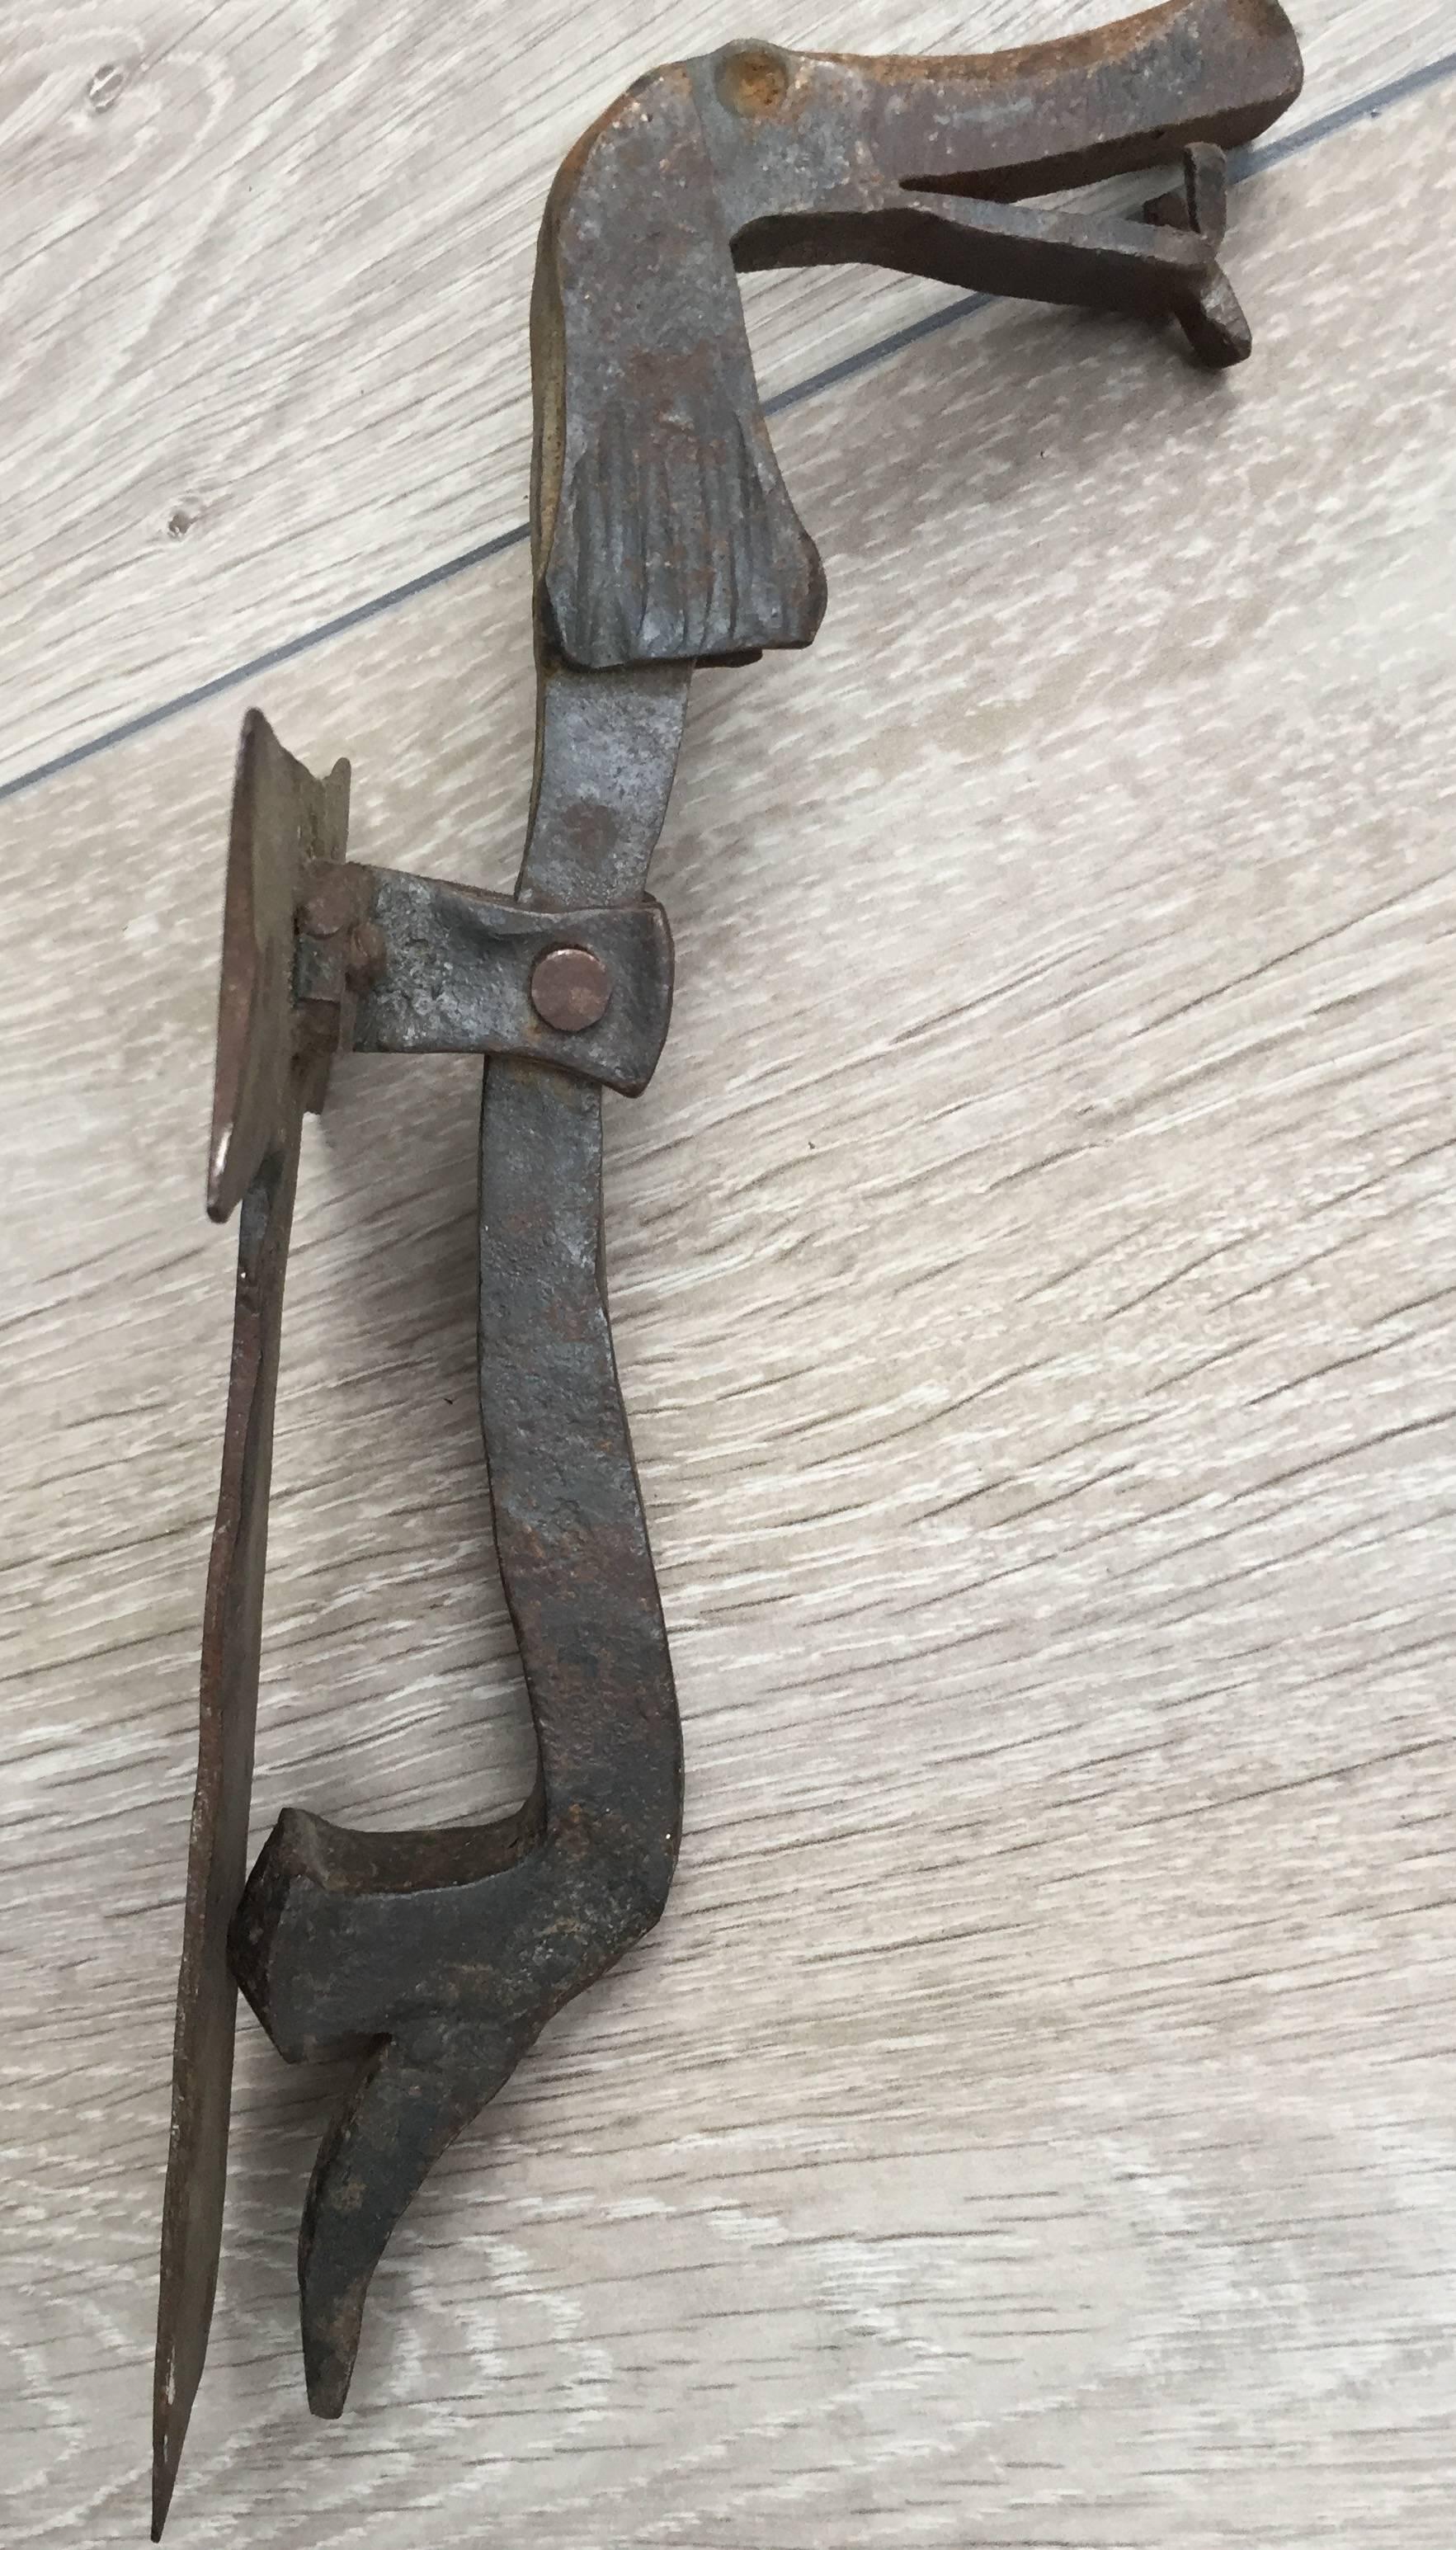 Possibly the most decorative and cool door knocker on 1stdibs.
 
This artistically designed and hand crafted, wrought iron door knocker is a joy to look at. It works perfectly and will look great on any wooden door. It may look ‘simple’ and rough